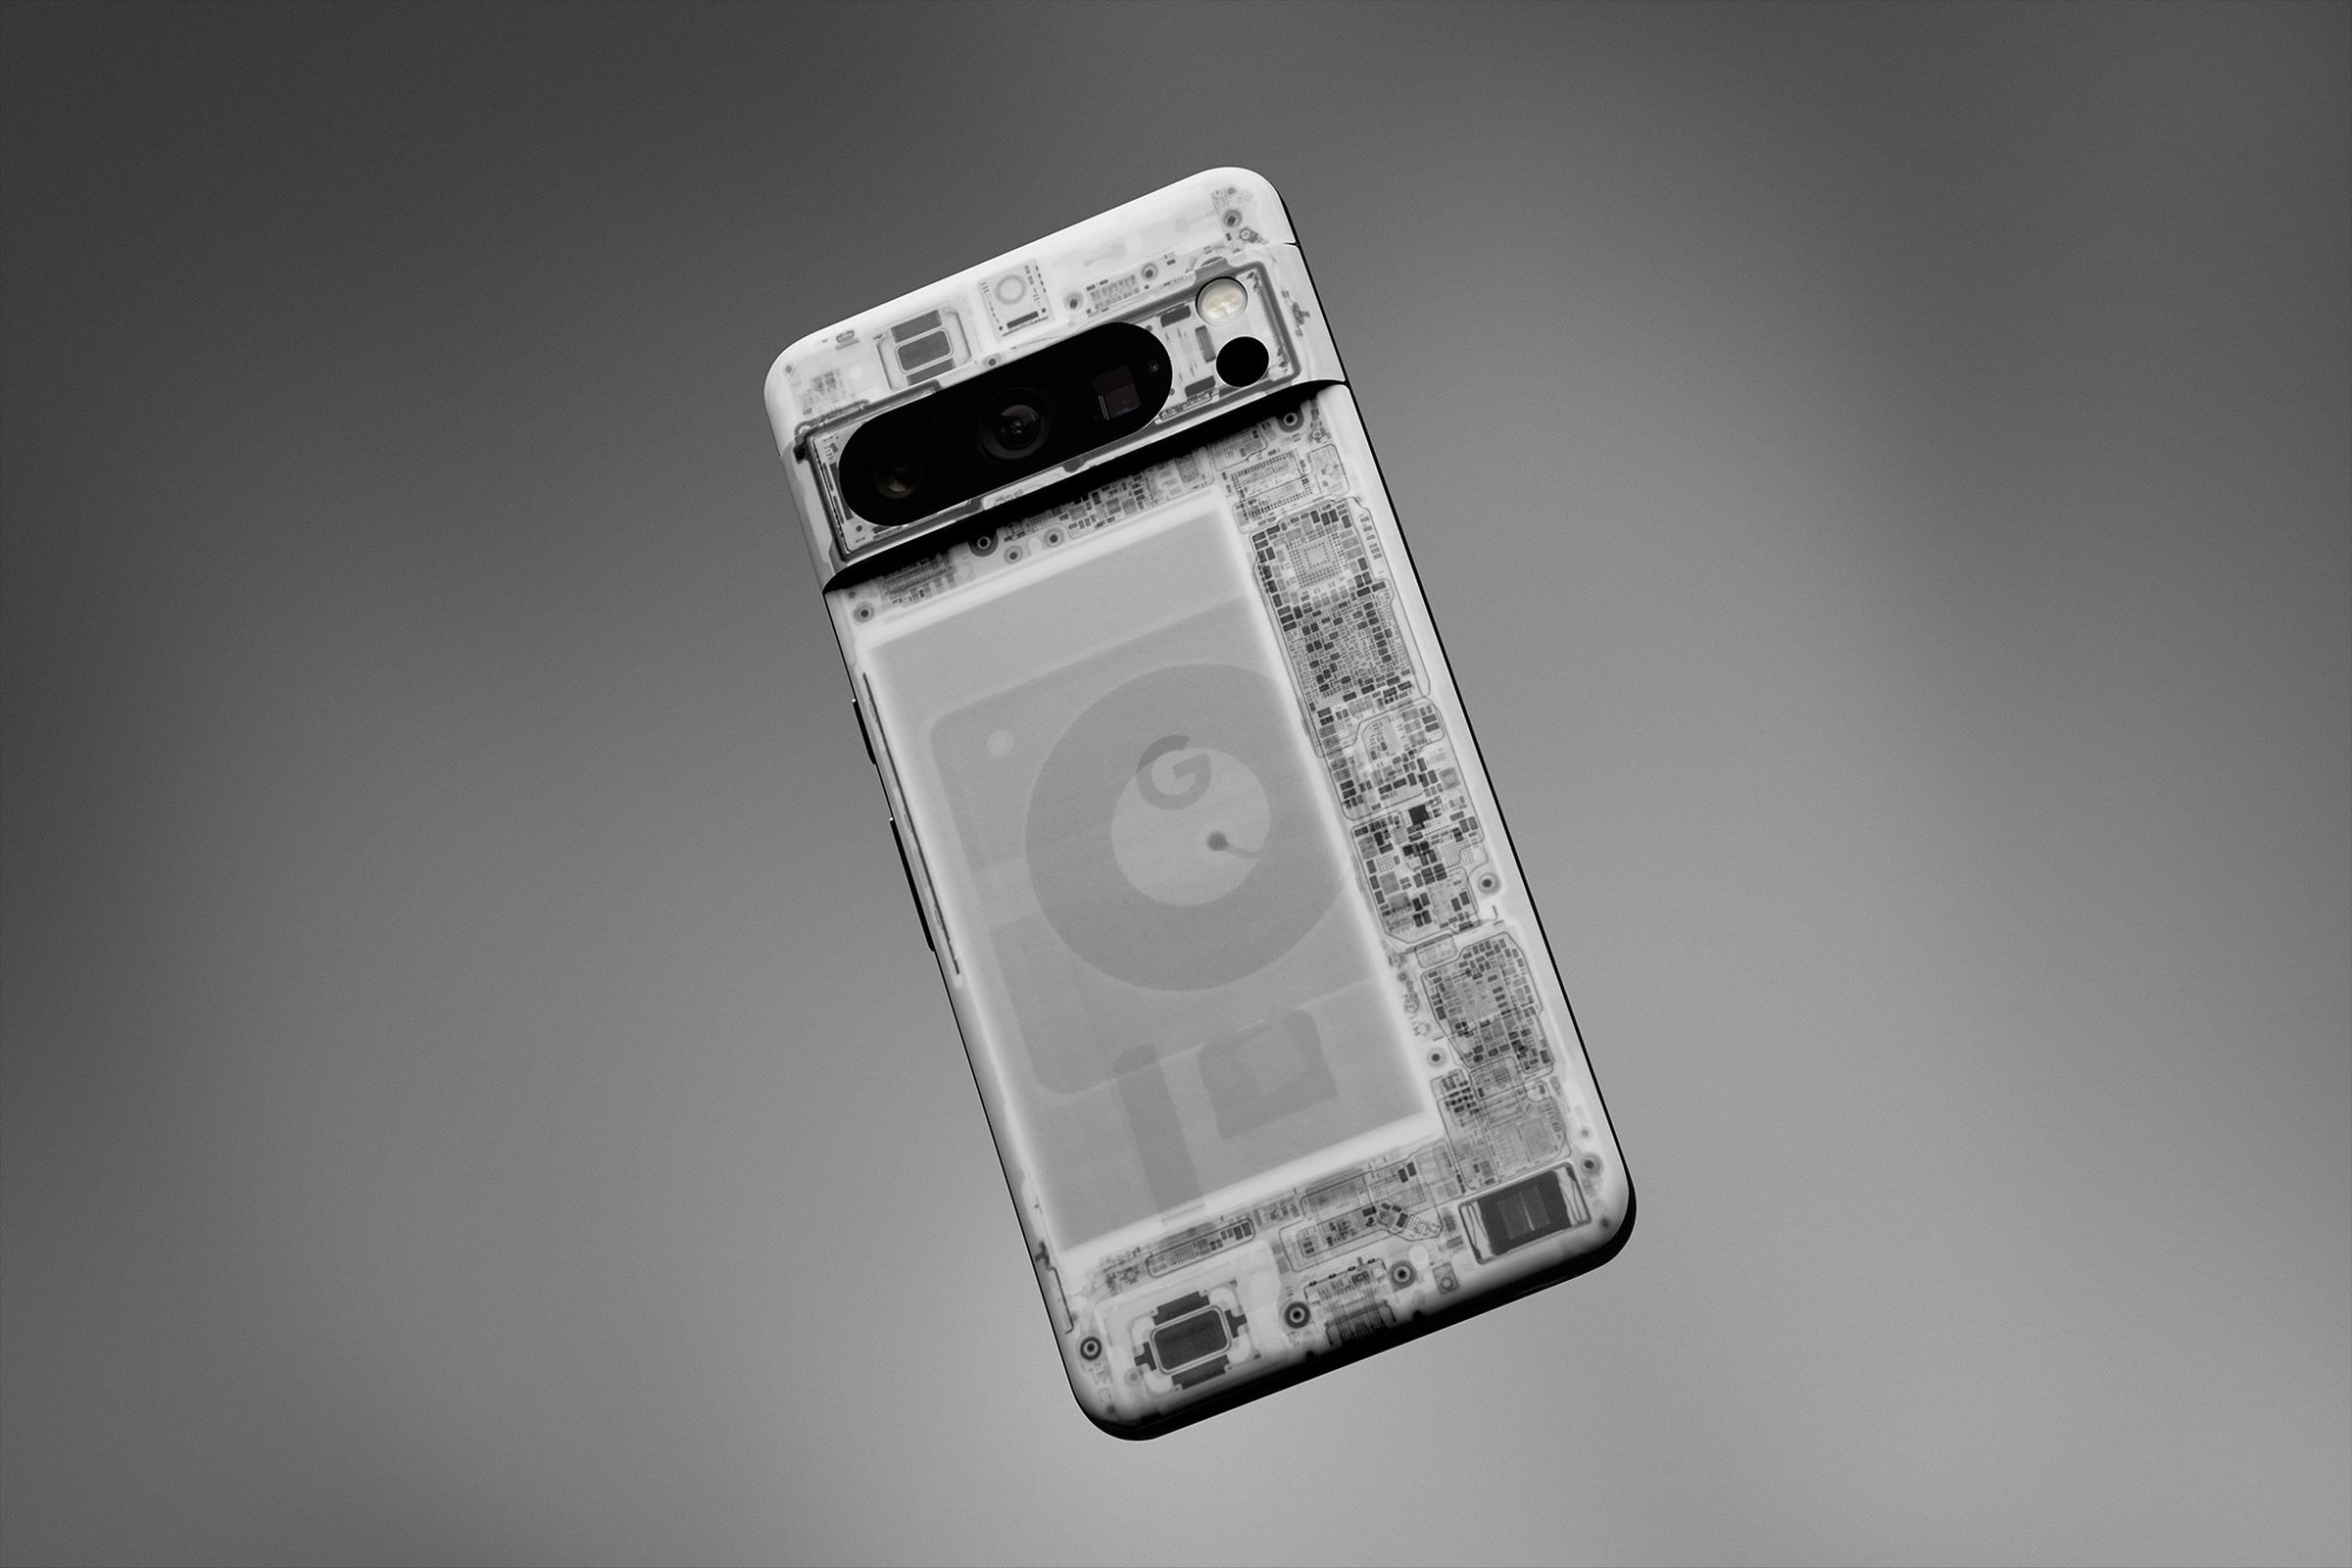 An image showing one of Dbrand’s X-ray phone skins